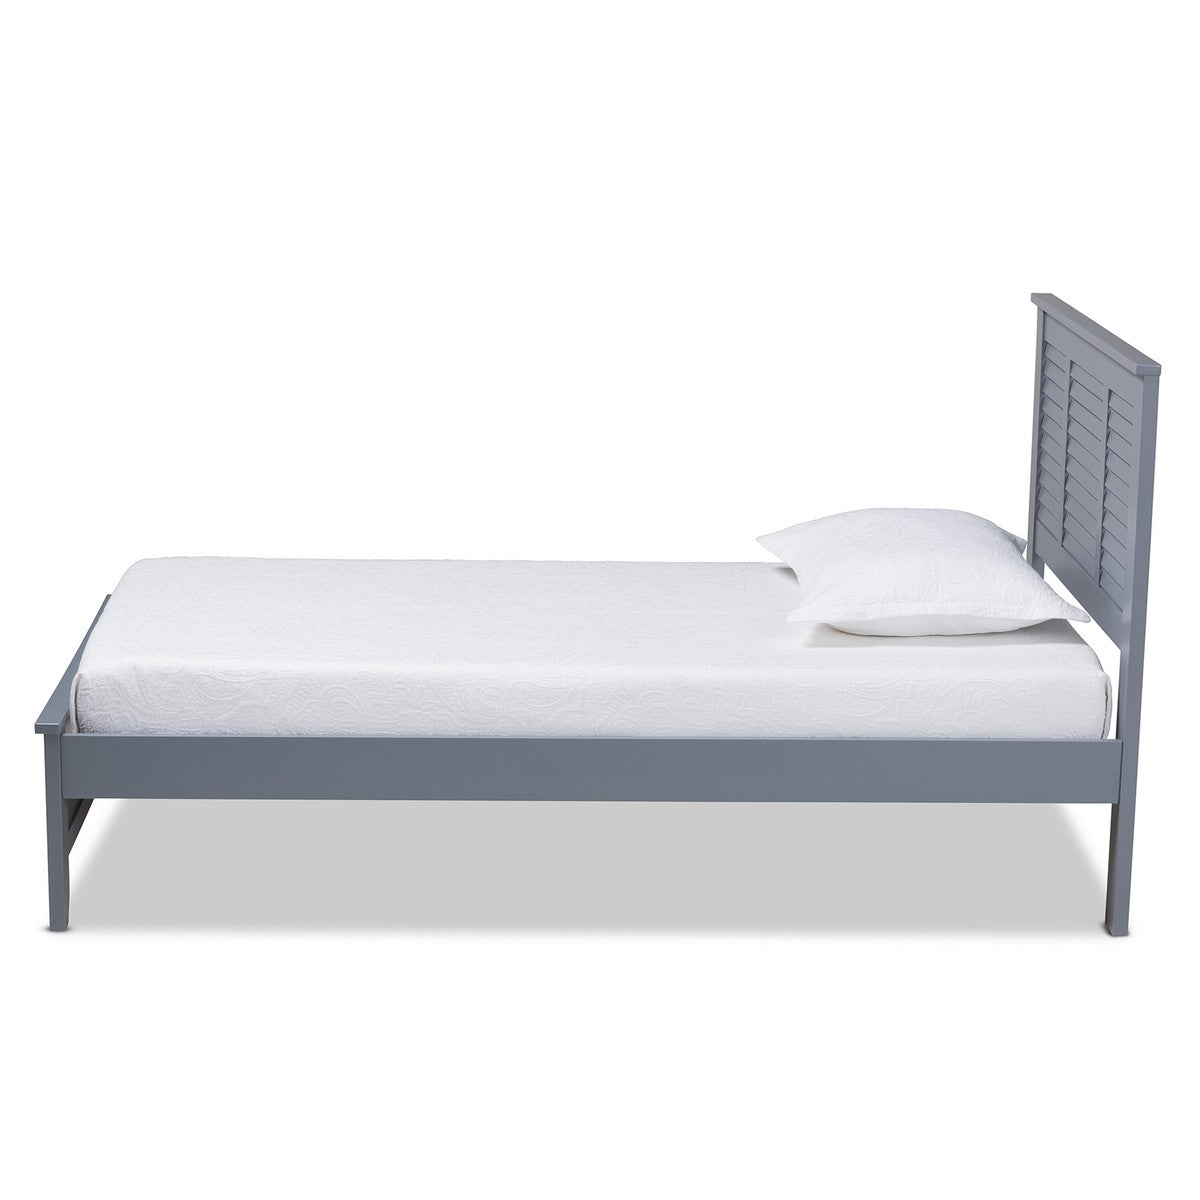 Baxton Studio Adela Modern and Contemporary Grey Finished Wood Twin Size Platform Bed